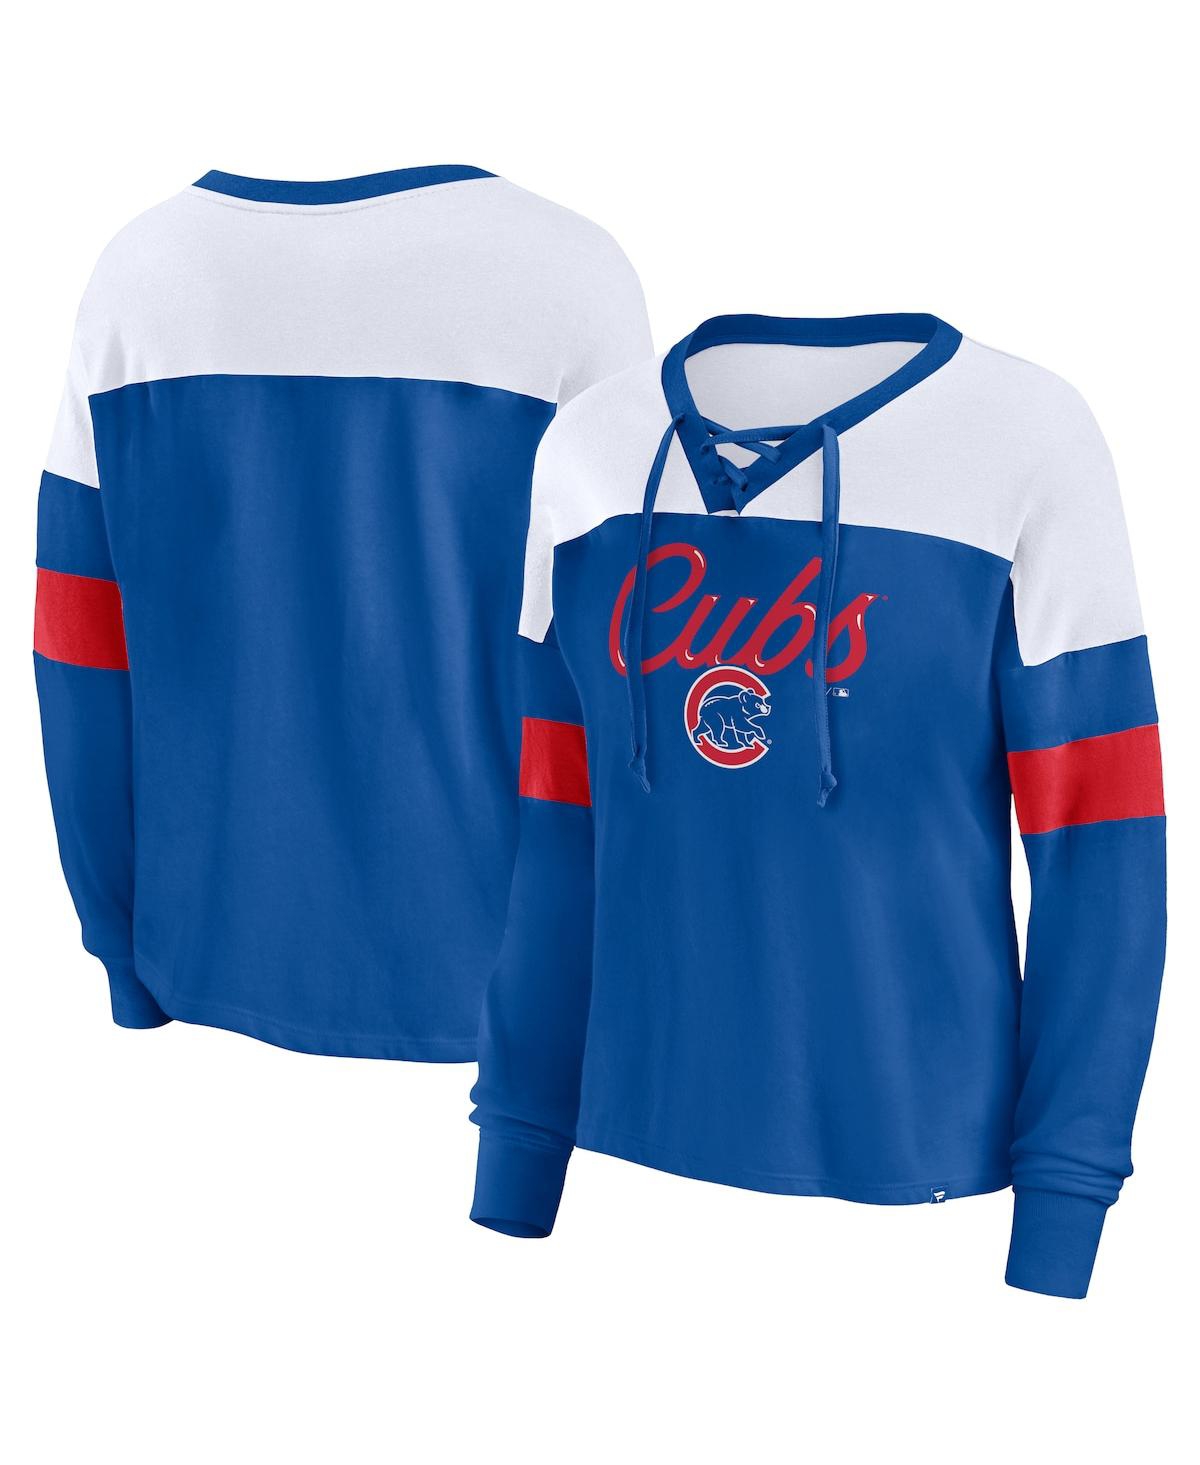 Women's Fanatics Branded Royal Chicago Cubs Perfect Play Raglan Pullover Hoodie